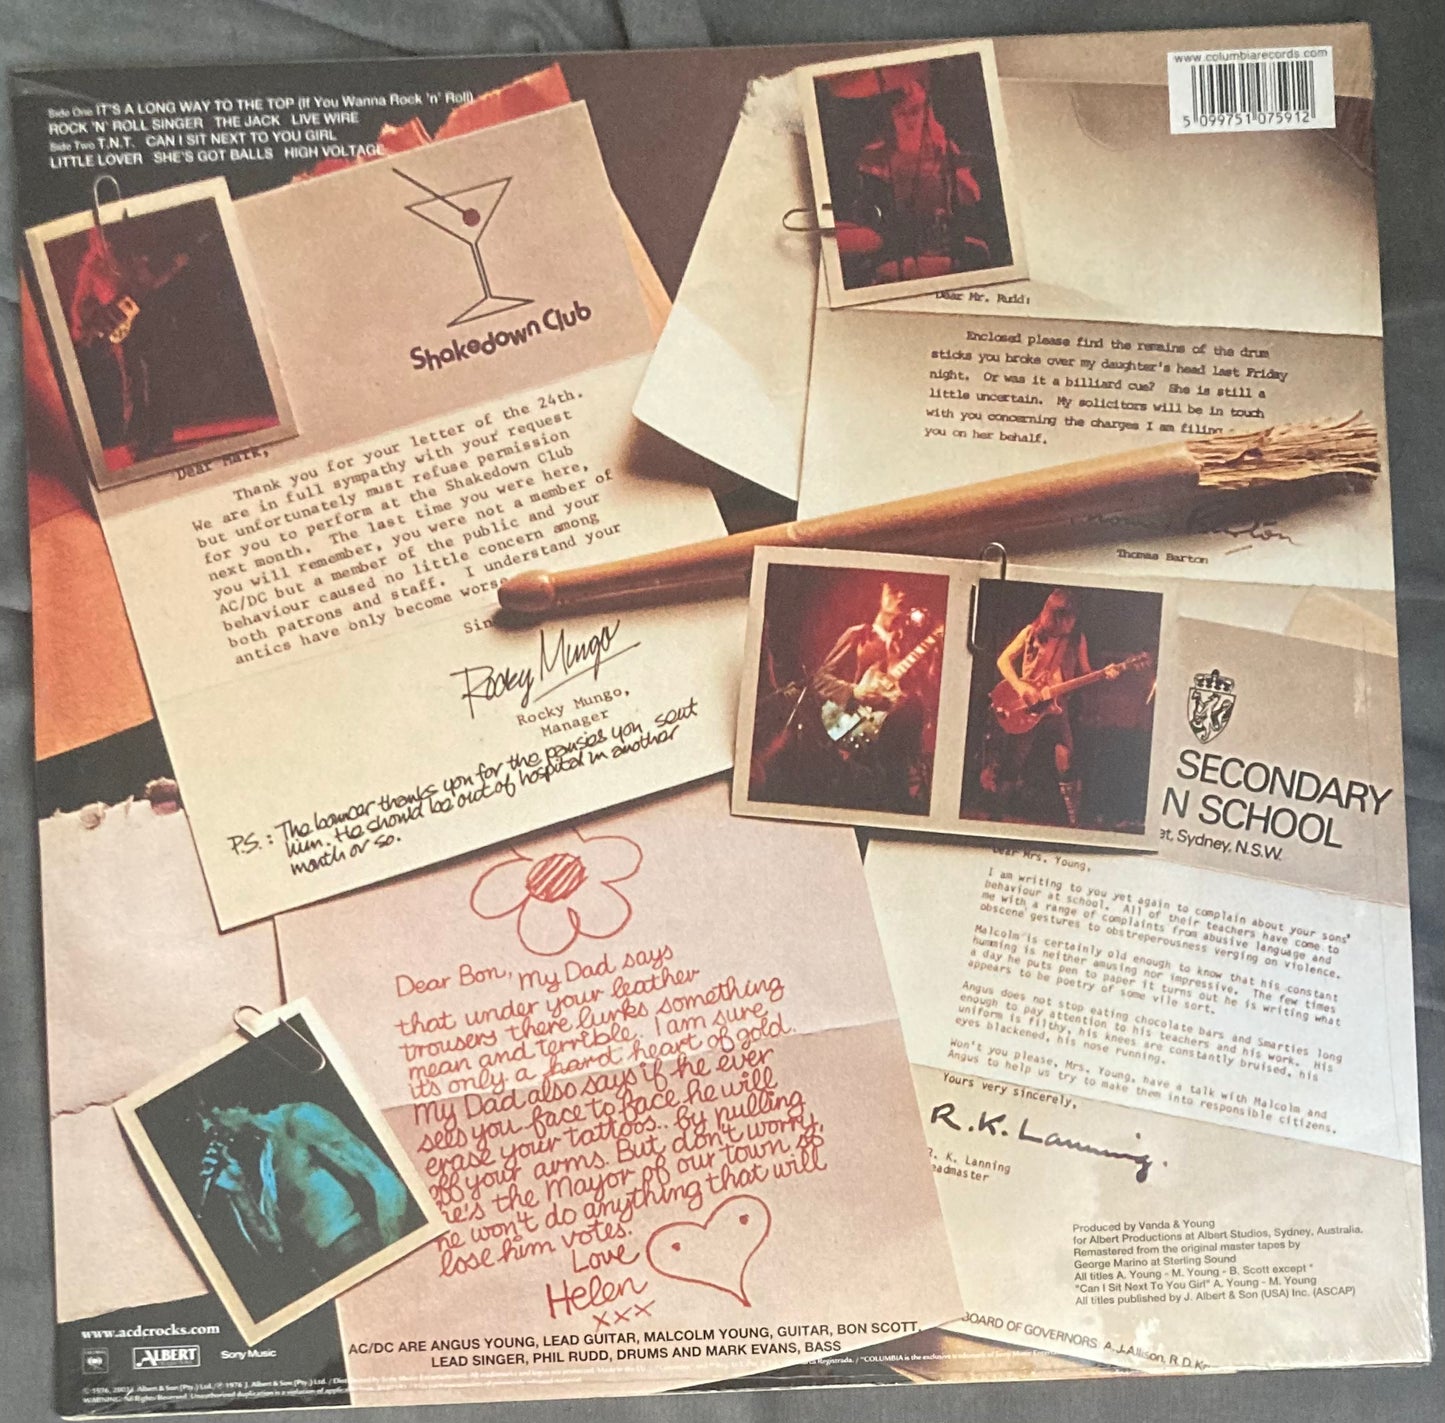 The back of 'AC/DC High Voltage' on vinyl